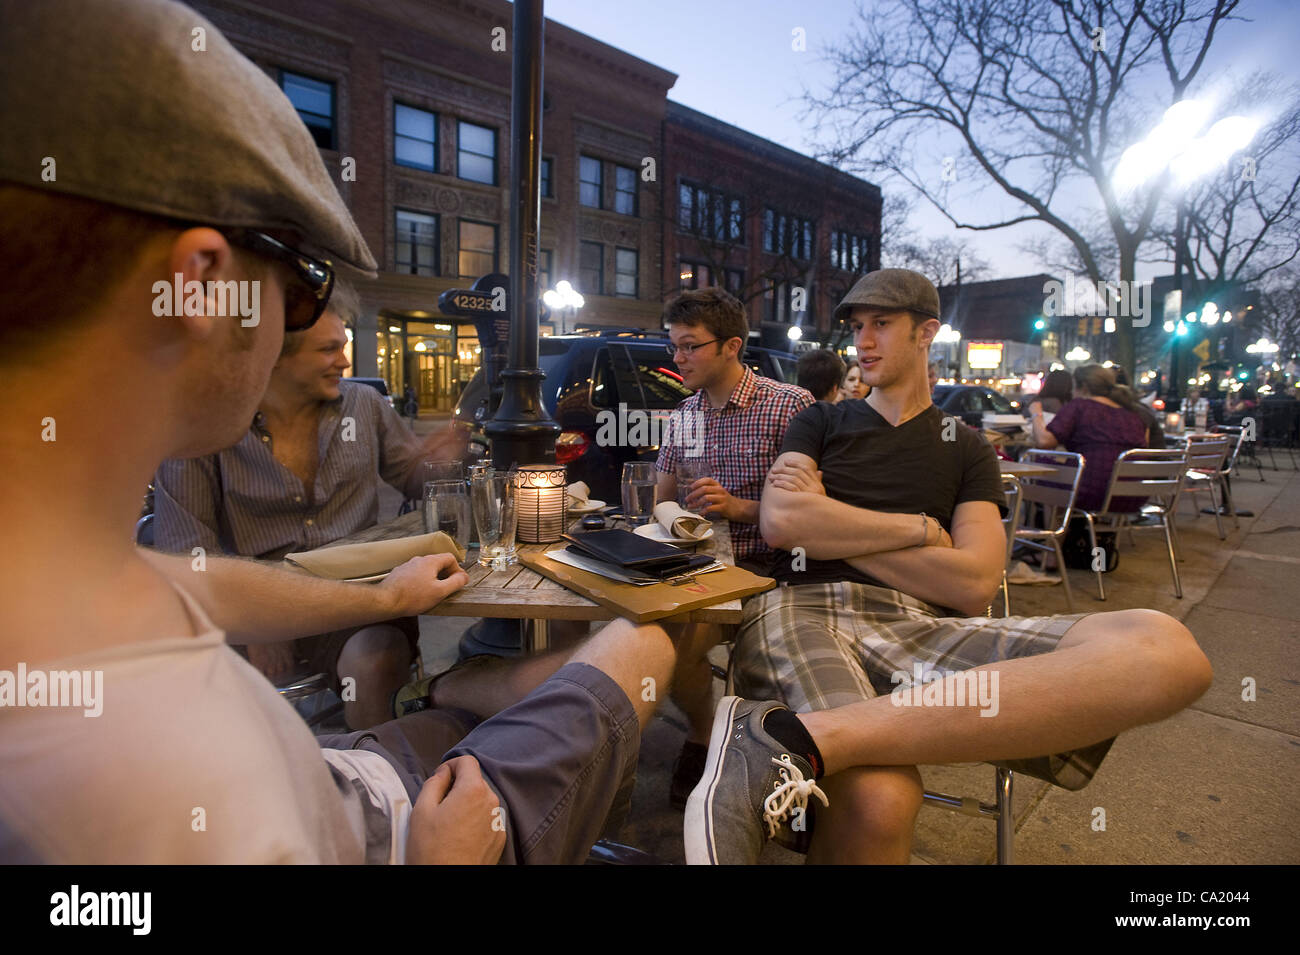 March 21, 2012 - Ann Arbor, Michigan, U.S - From left, Kevin Mckinney, Floyd Cheeseman, Matt Peckhan, and Henry Rensch relax outside the Jolly Pumpkin bar and restaurant on Main Street in downtown Ann Arbor, MI on March 21, 2012.  Temperatures in the low 80s brought large crowds of people out to din Stock Photo